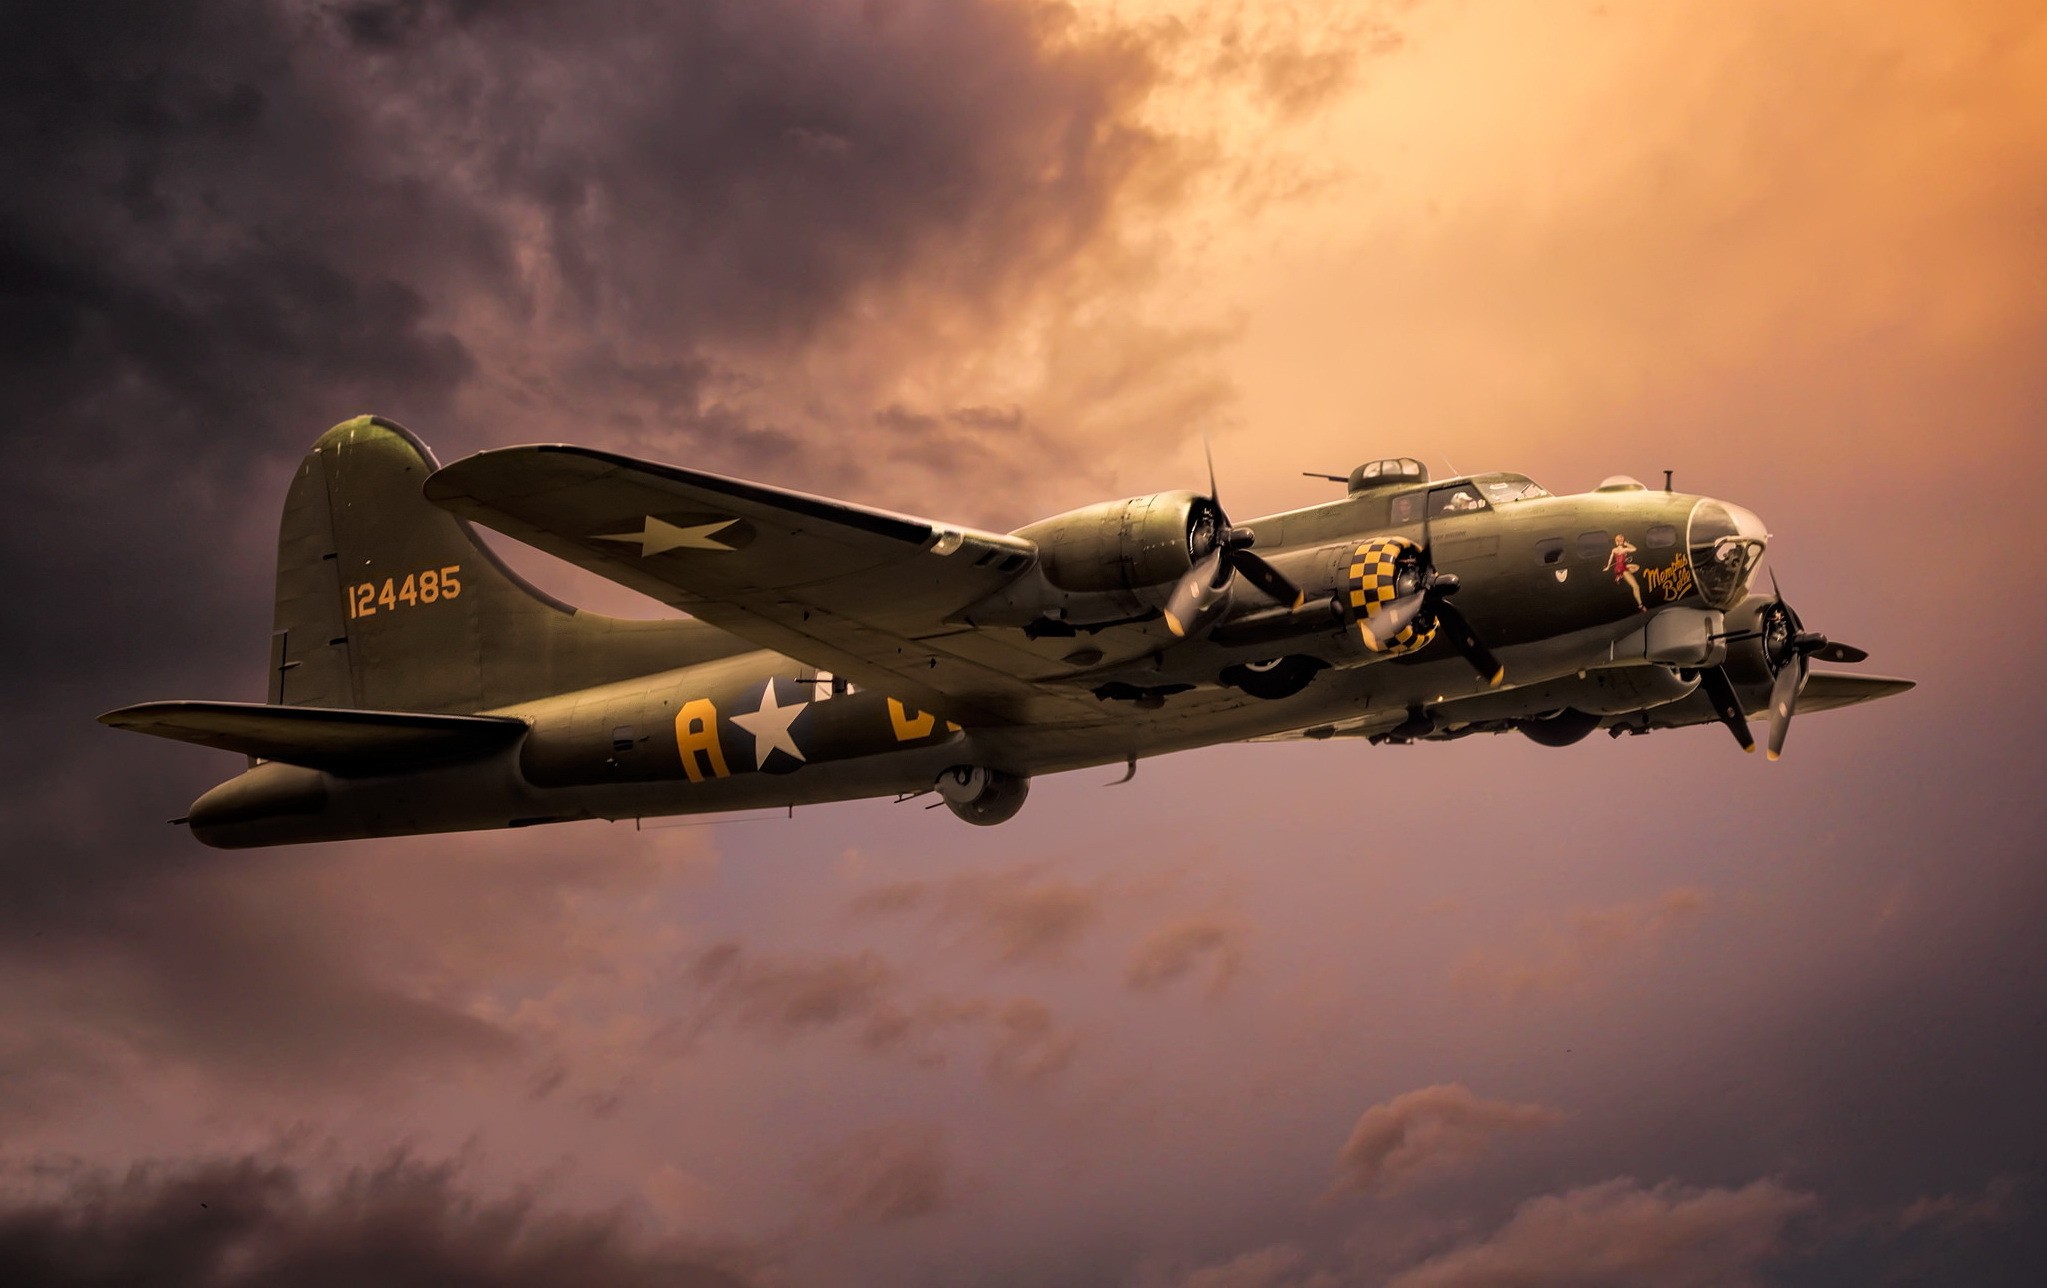 boeing b 17 flying fortress, warplane, military, air force, aircraft, airplane, bomber, bombers